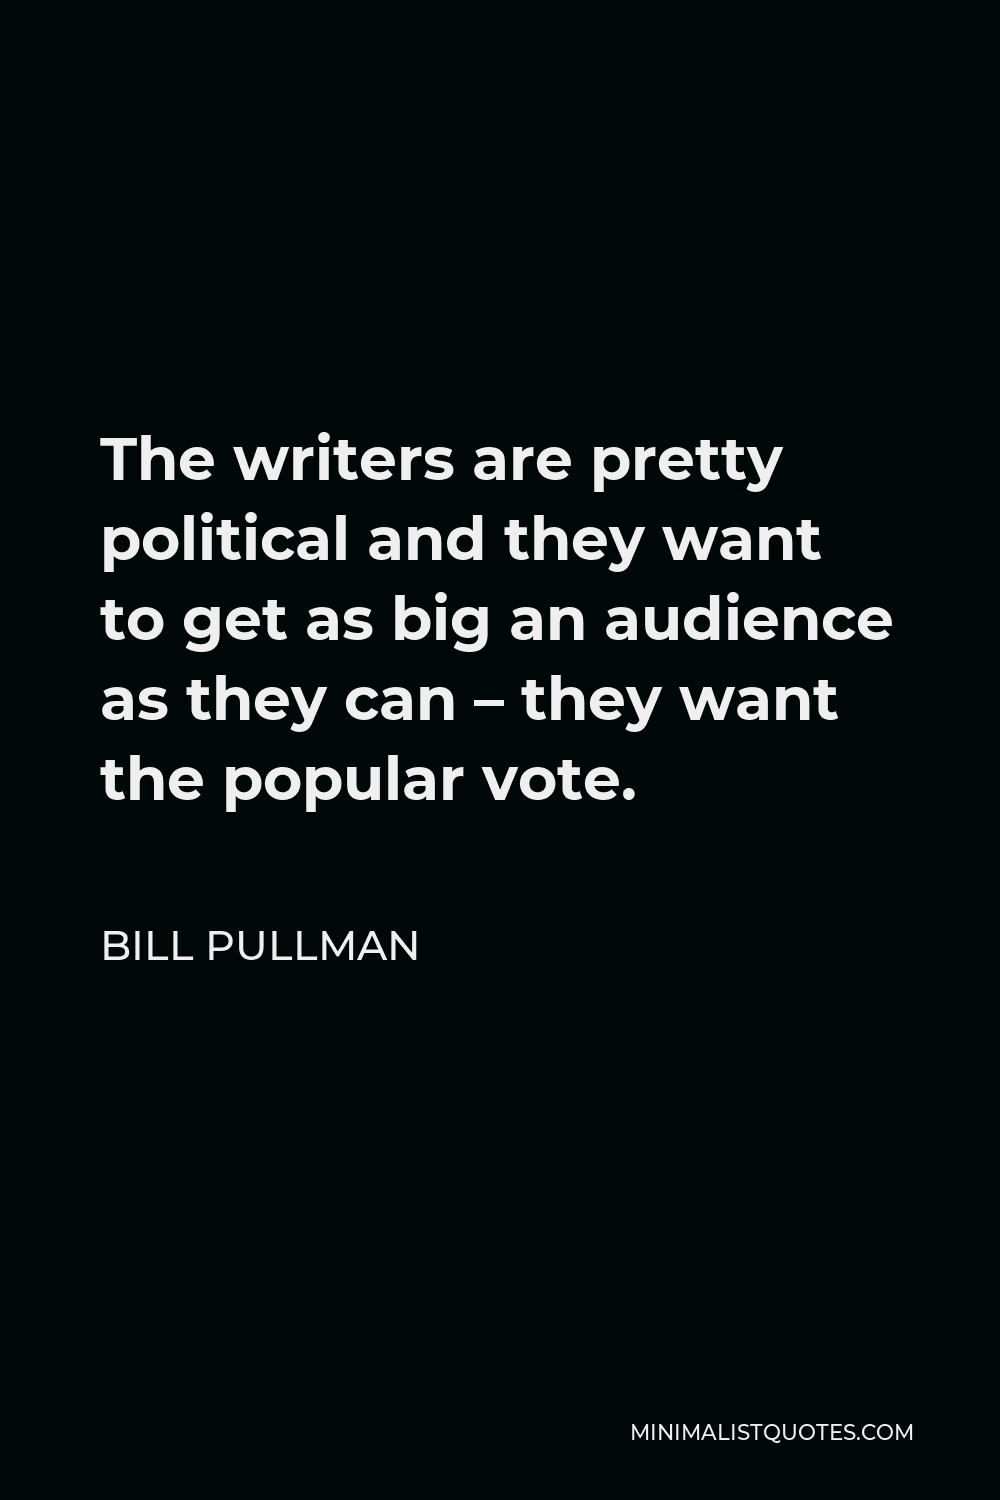 Bill Pullman Quote - The writers are pretty political and they want to get as big an audience as they can – they want the popular vote.